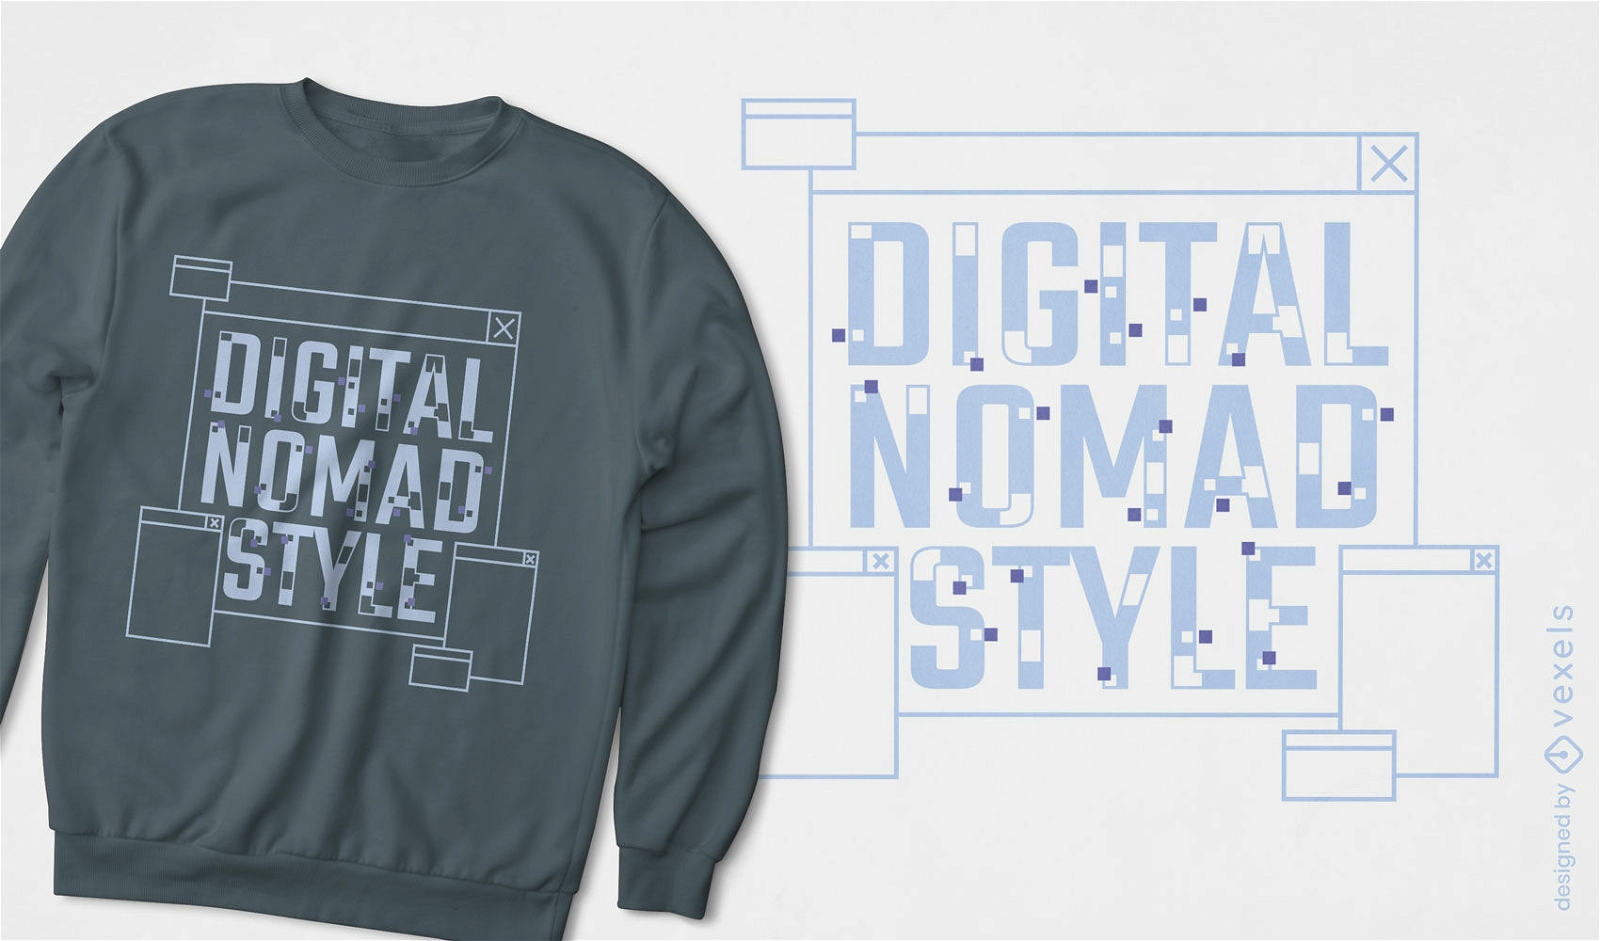 Digital nomad style quote t-shirt design